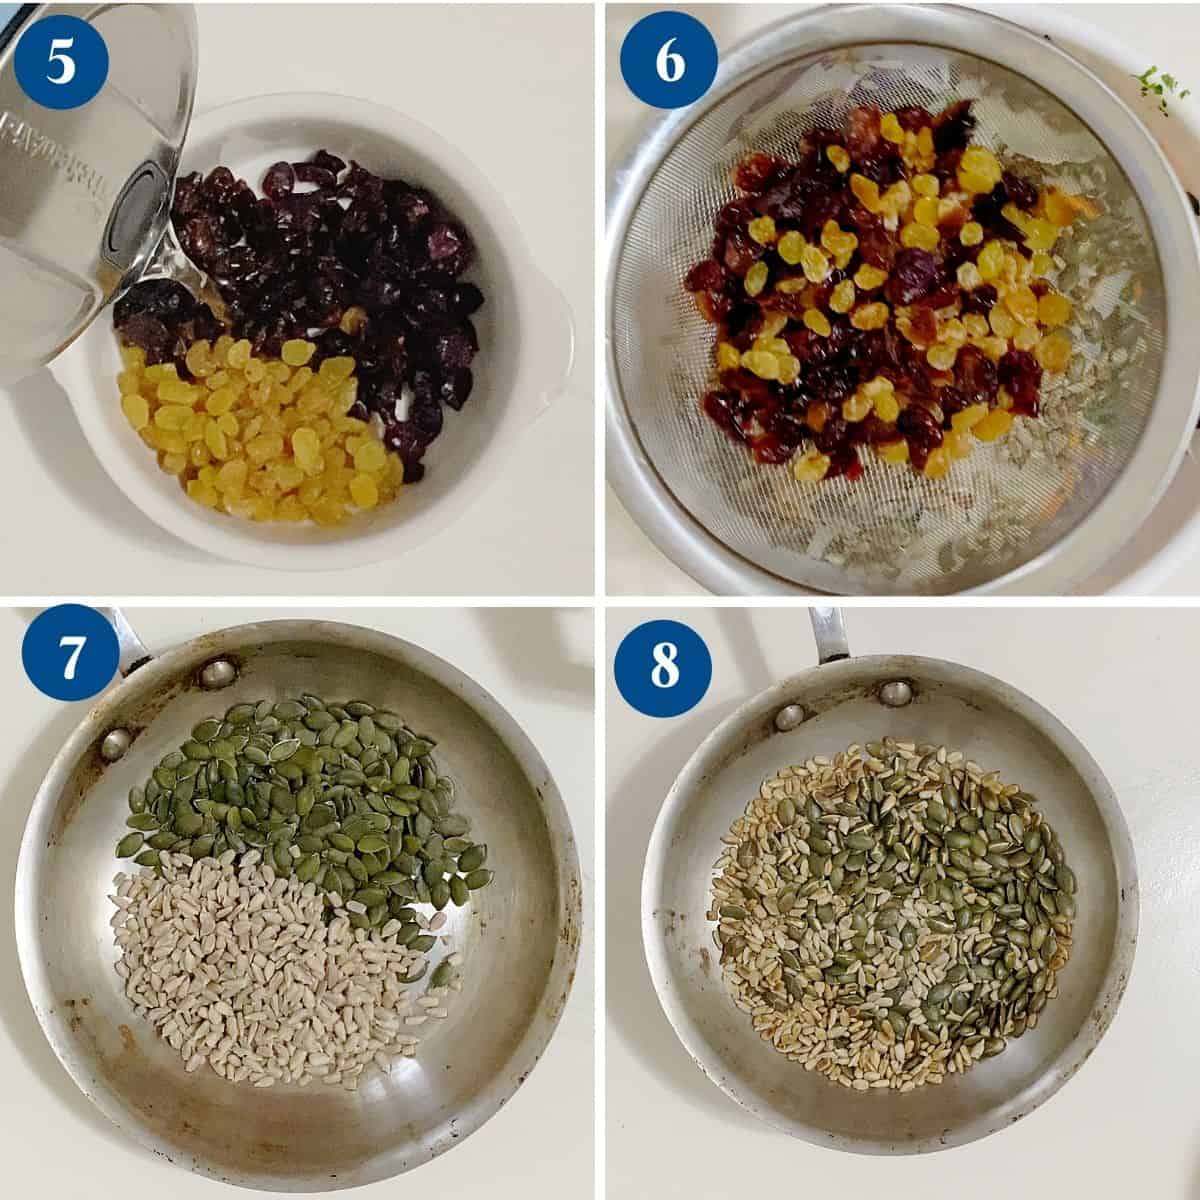 Progress pictures toasting seeds and soaking fruits.